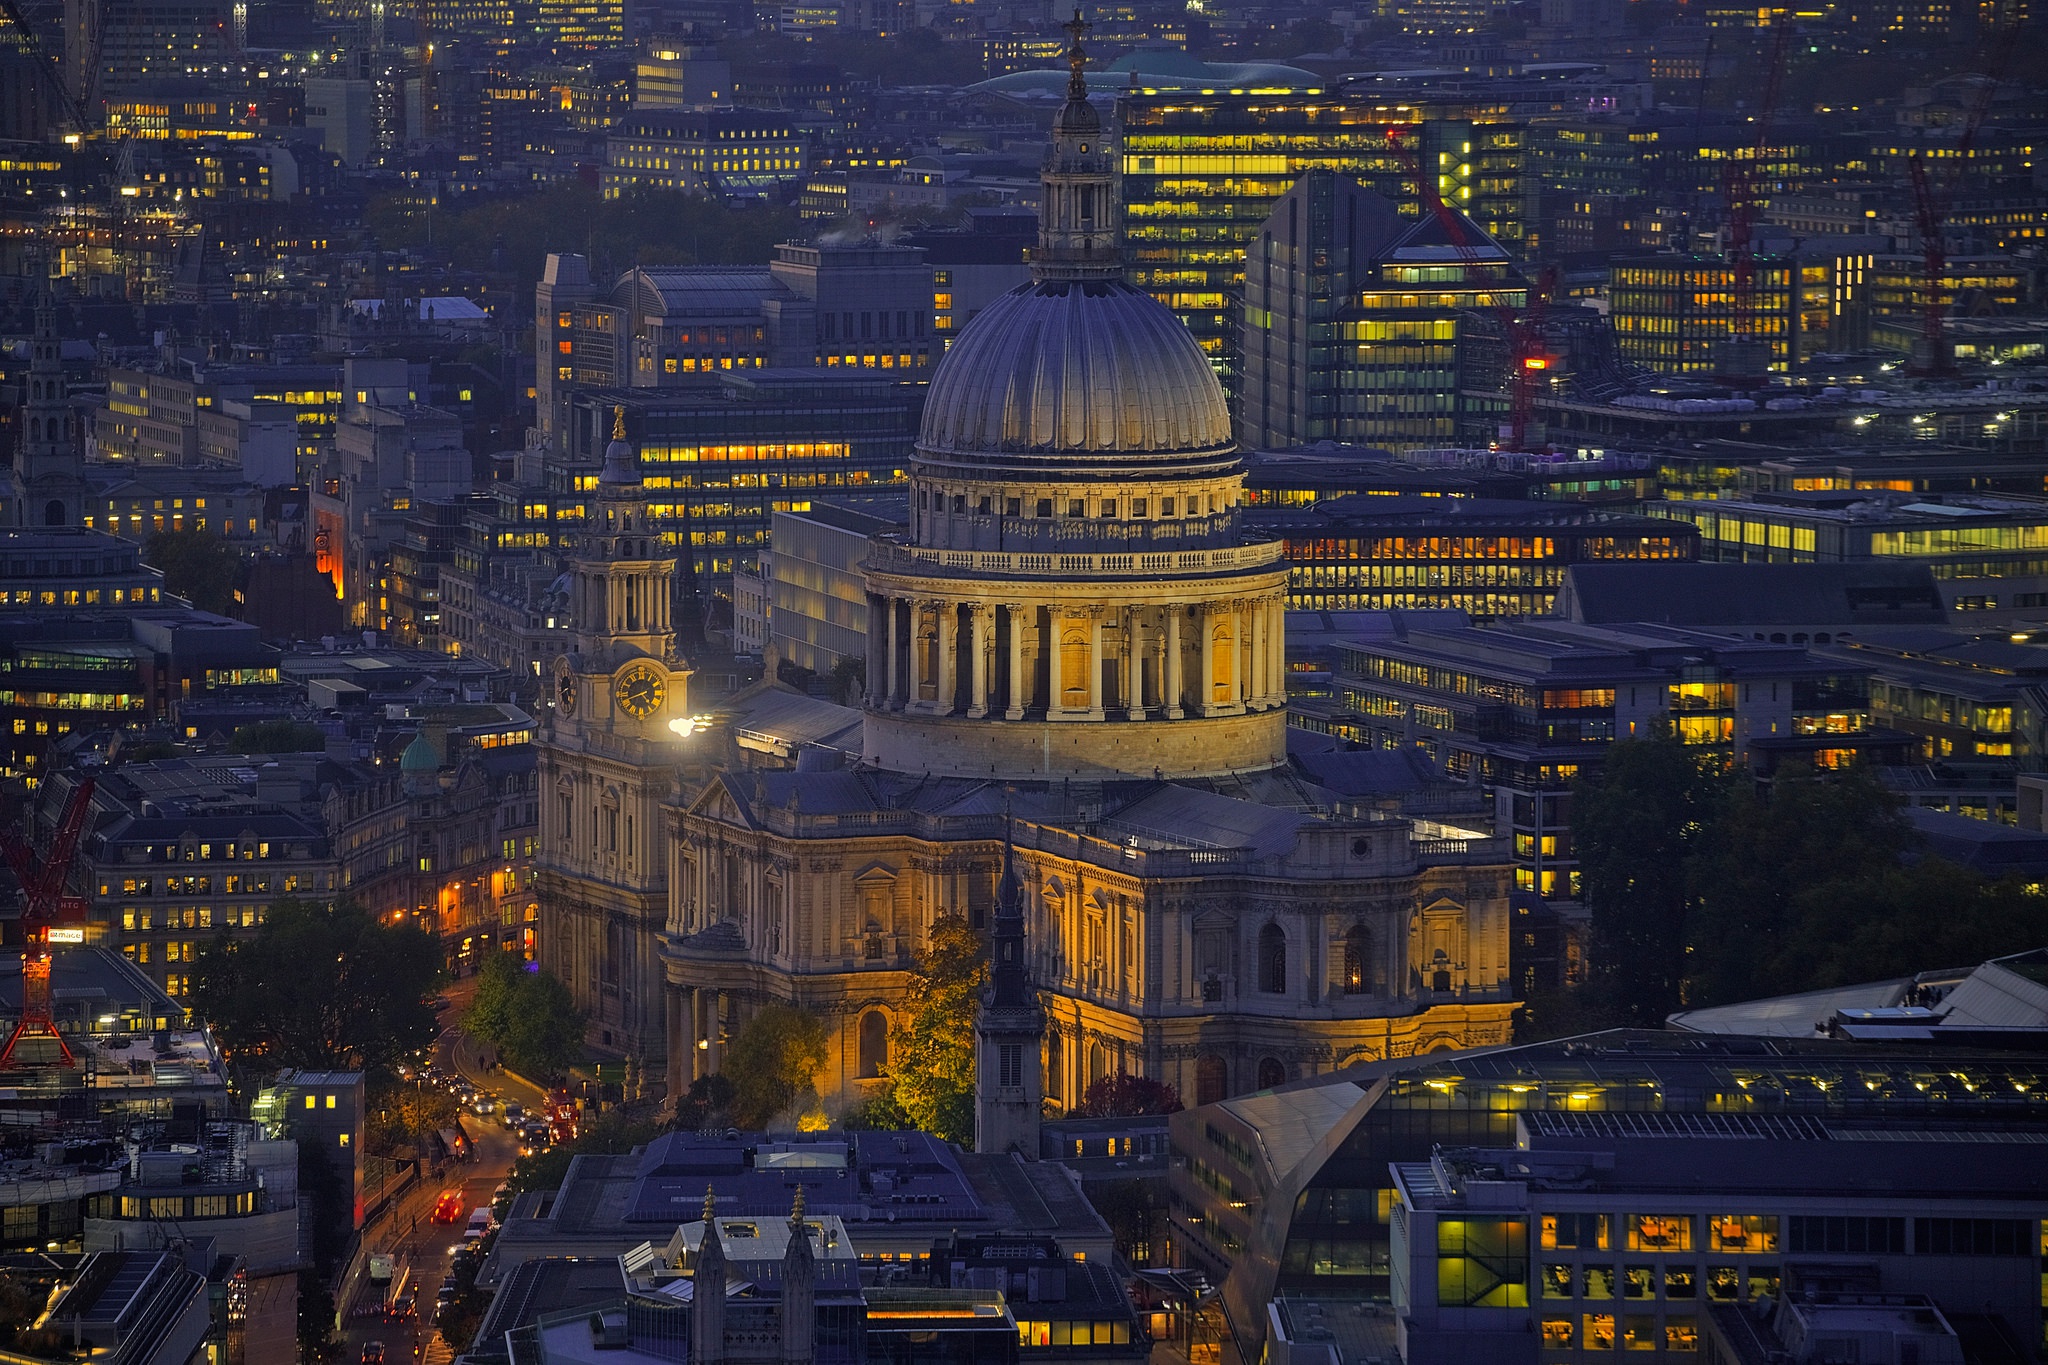 Religious St. Paul's Cathedral HD Wallpaper | Background Image